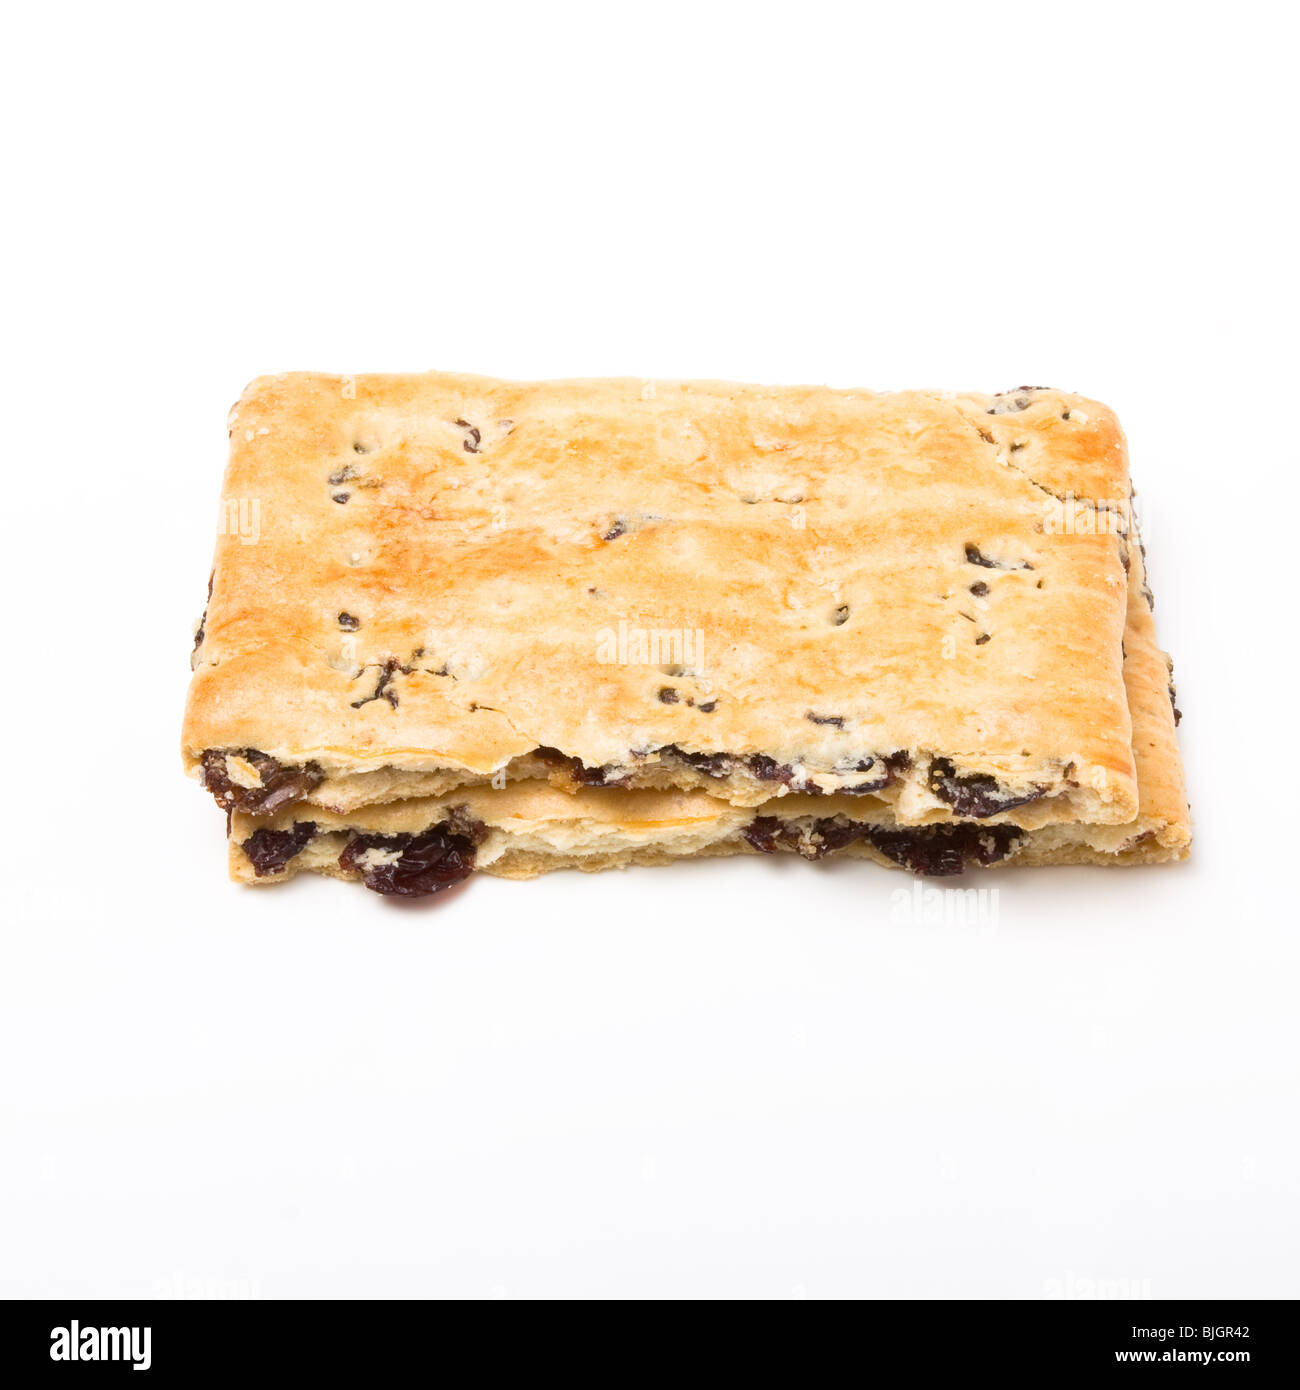 Garibaldi Biscuit from low perspective isolated against white bacground. Stock Photo